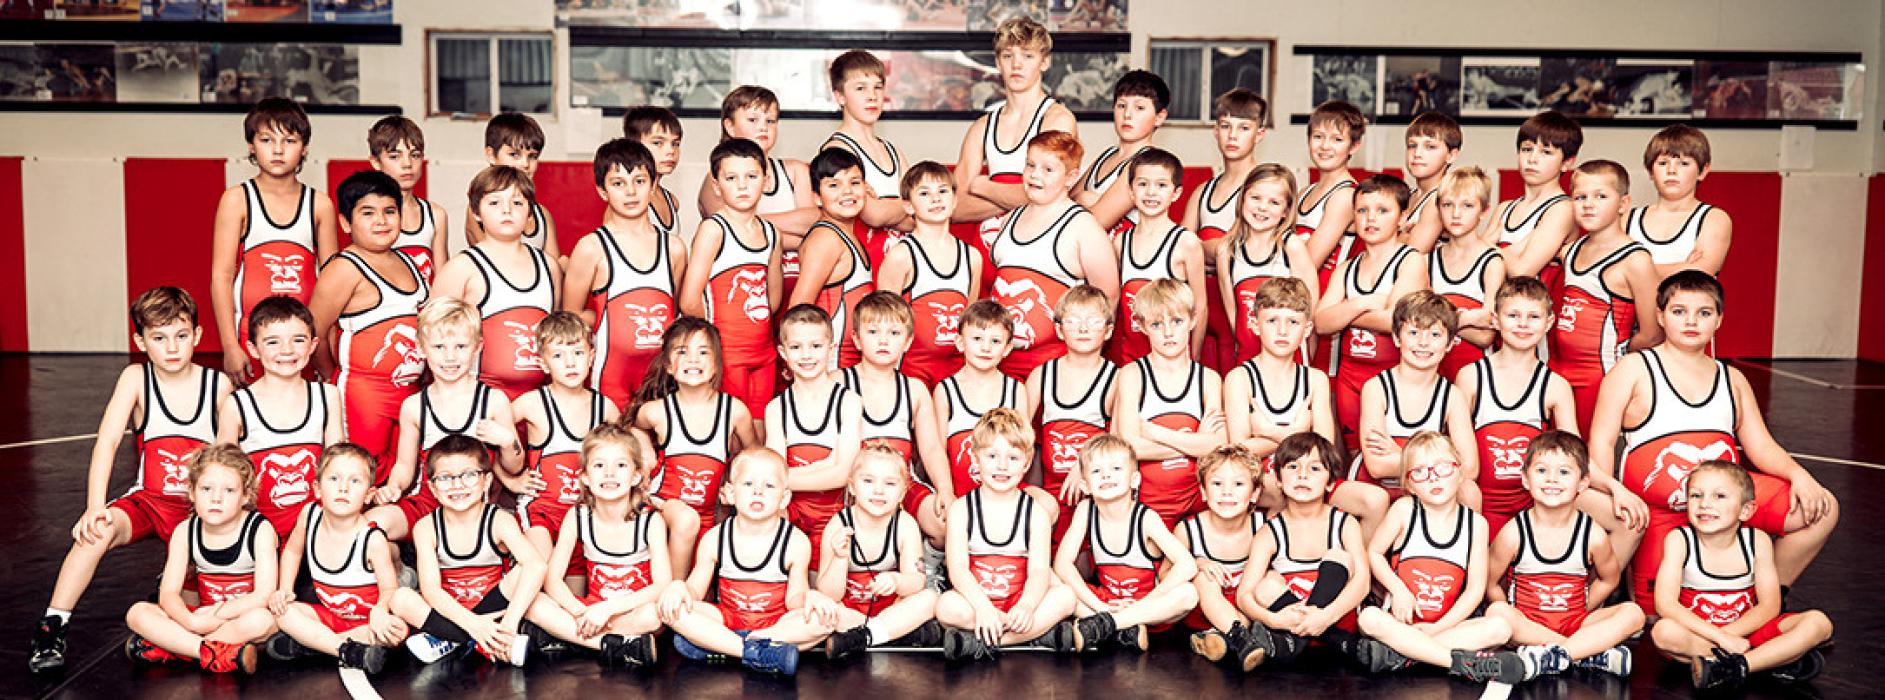 Gregory youth wrestlers competed in Districts action held in Winner